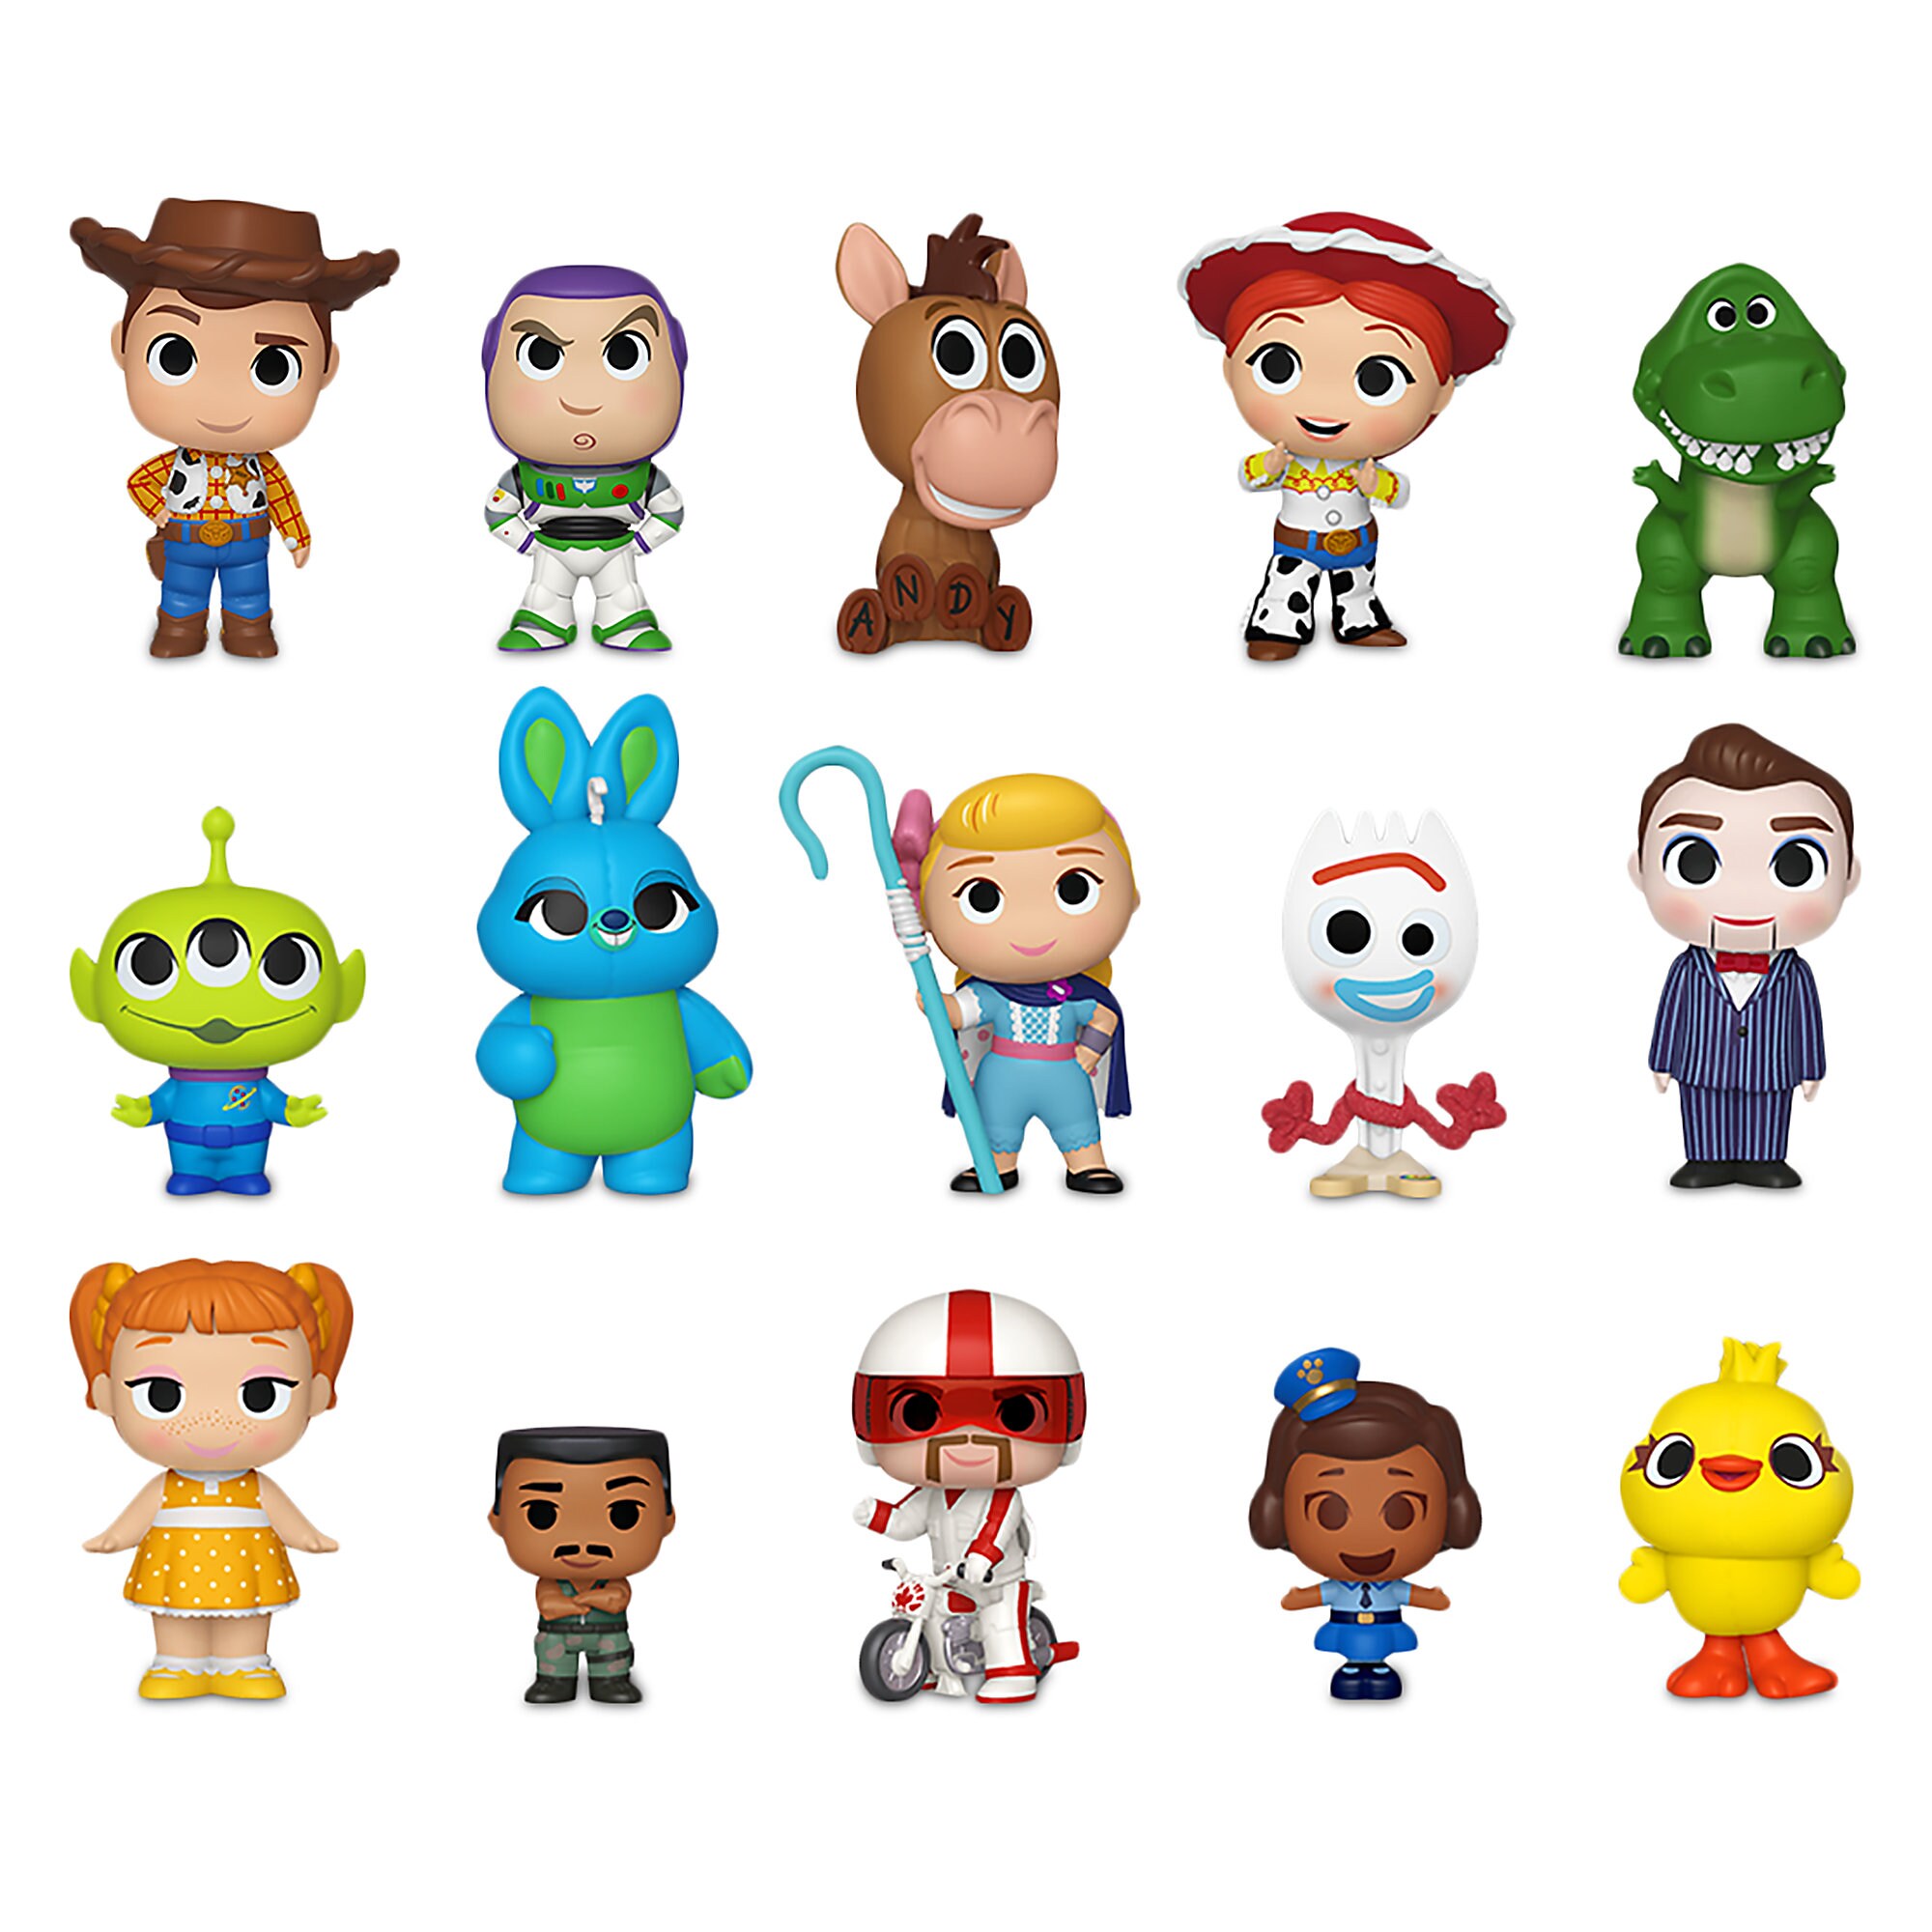 Toy Story 4 Mystery Minis Vinyl Figure by Funko